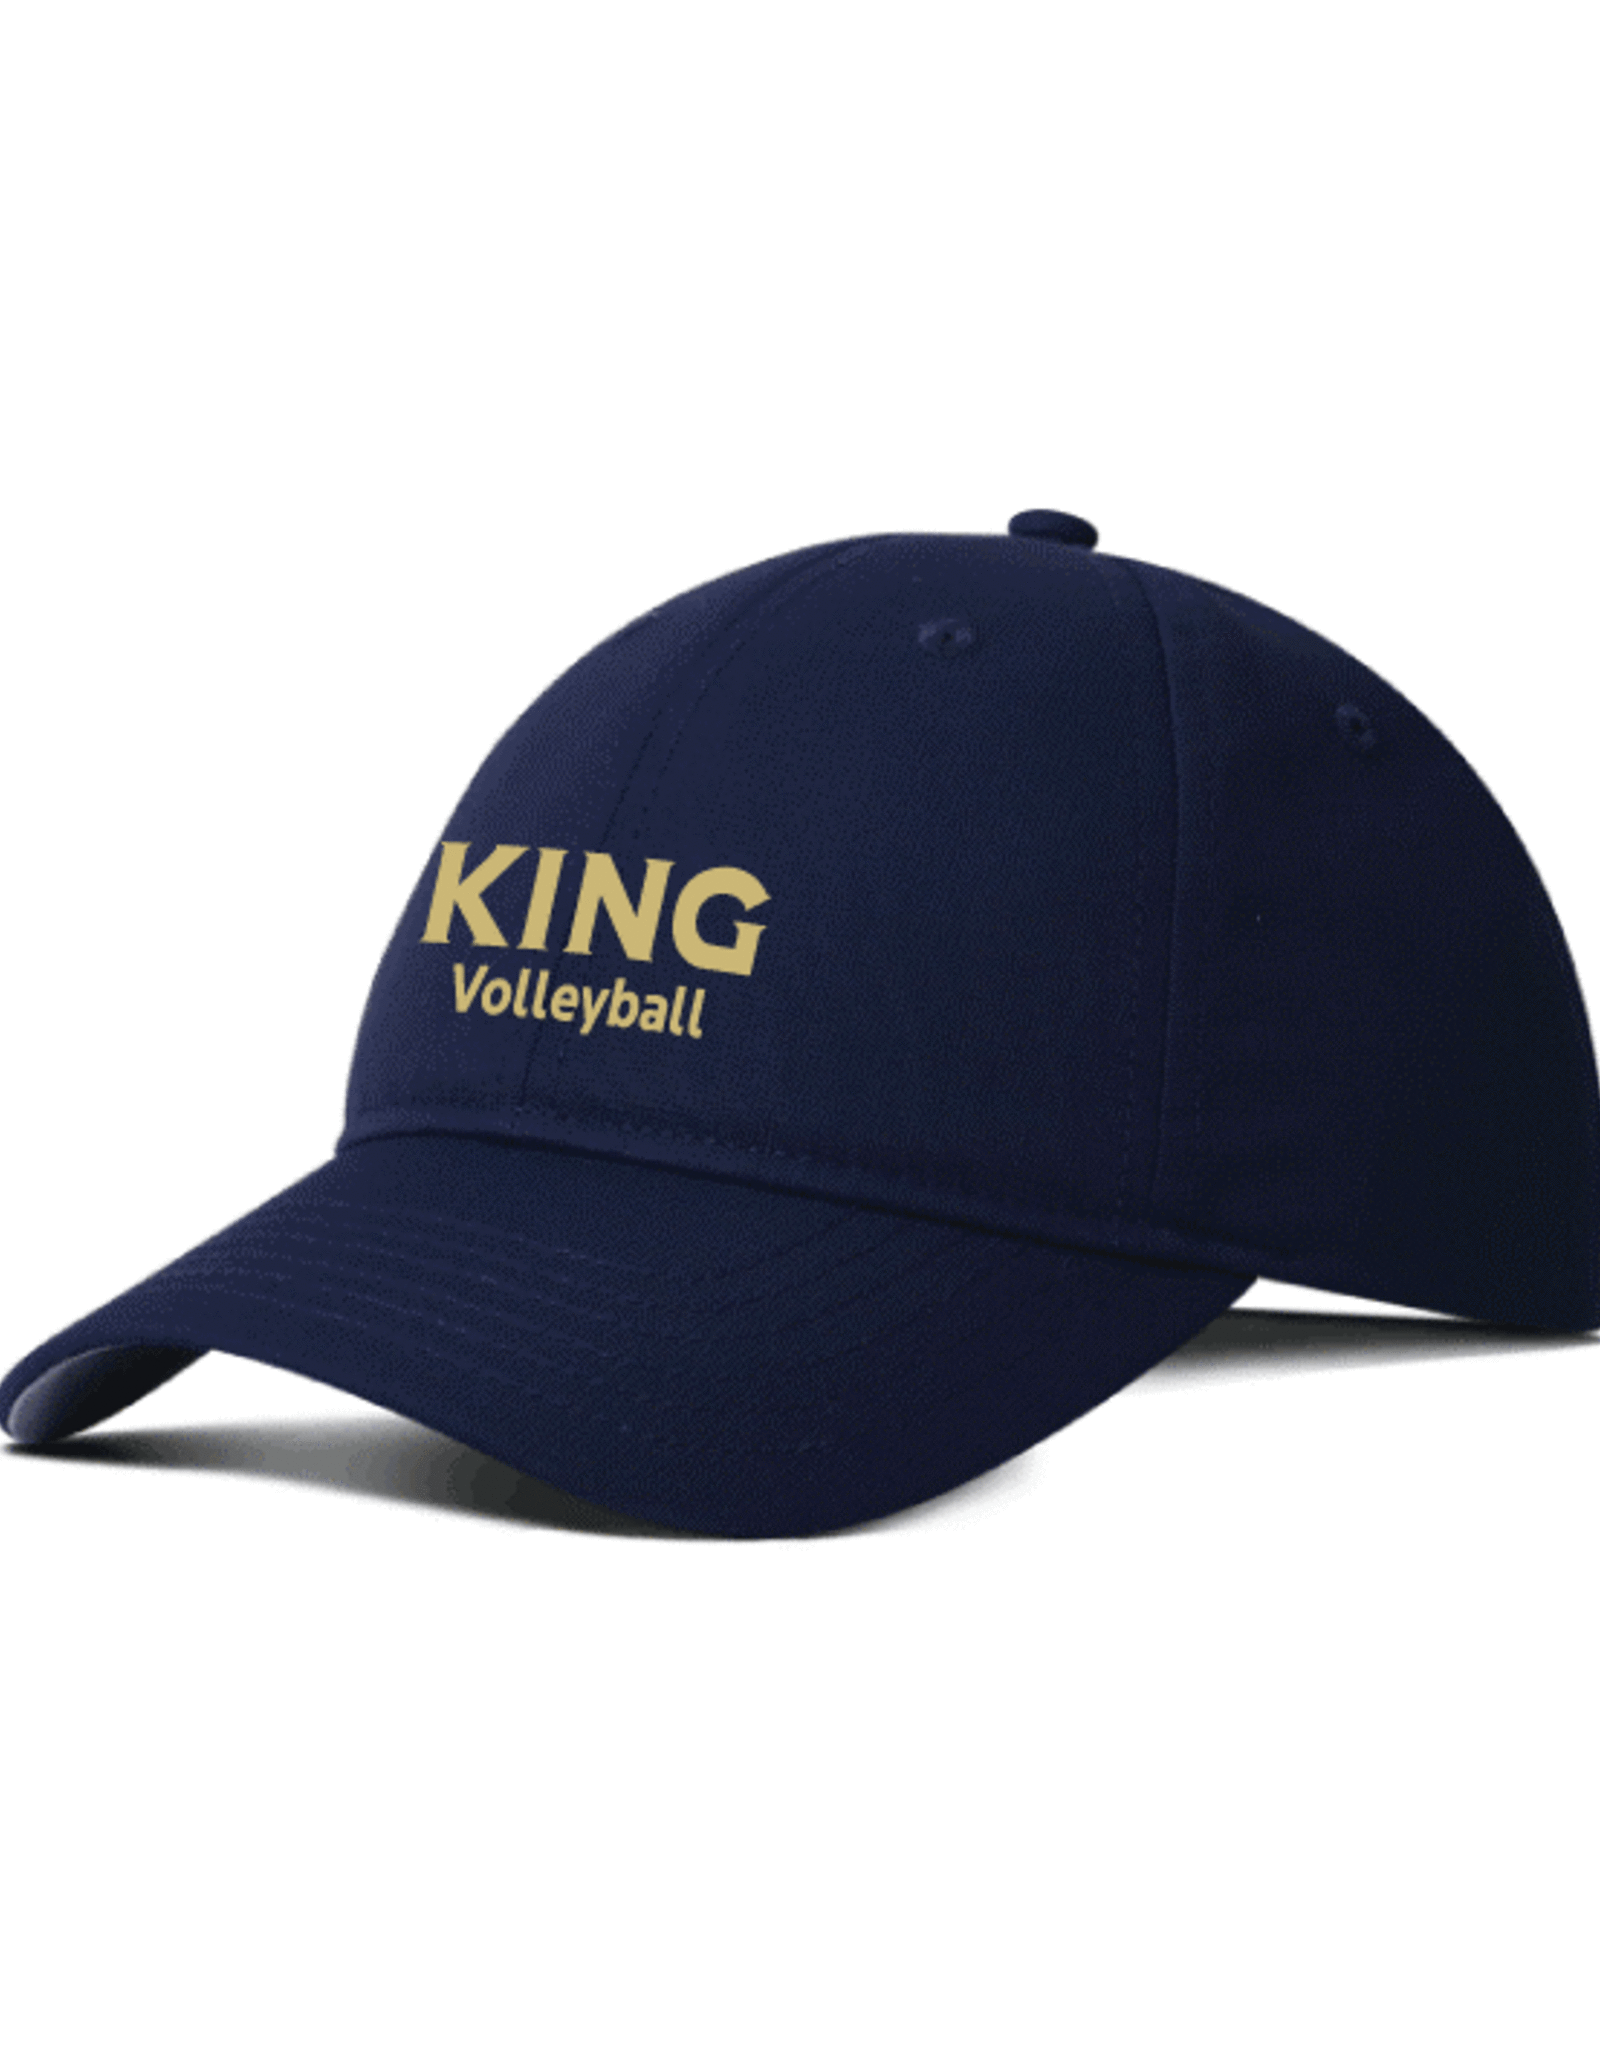 Volleyball Performance Cap